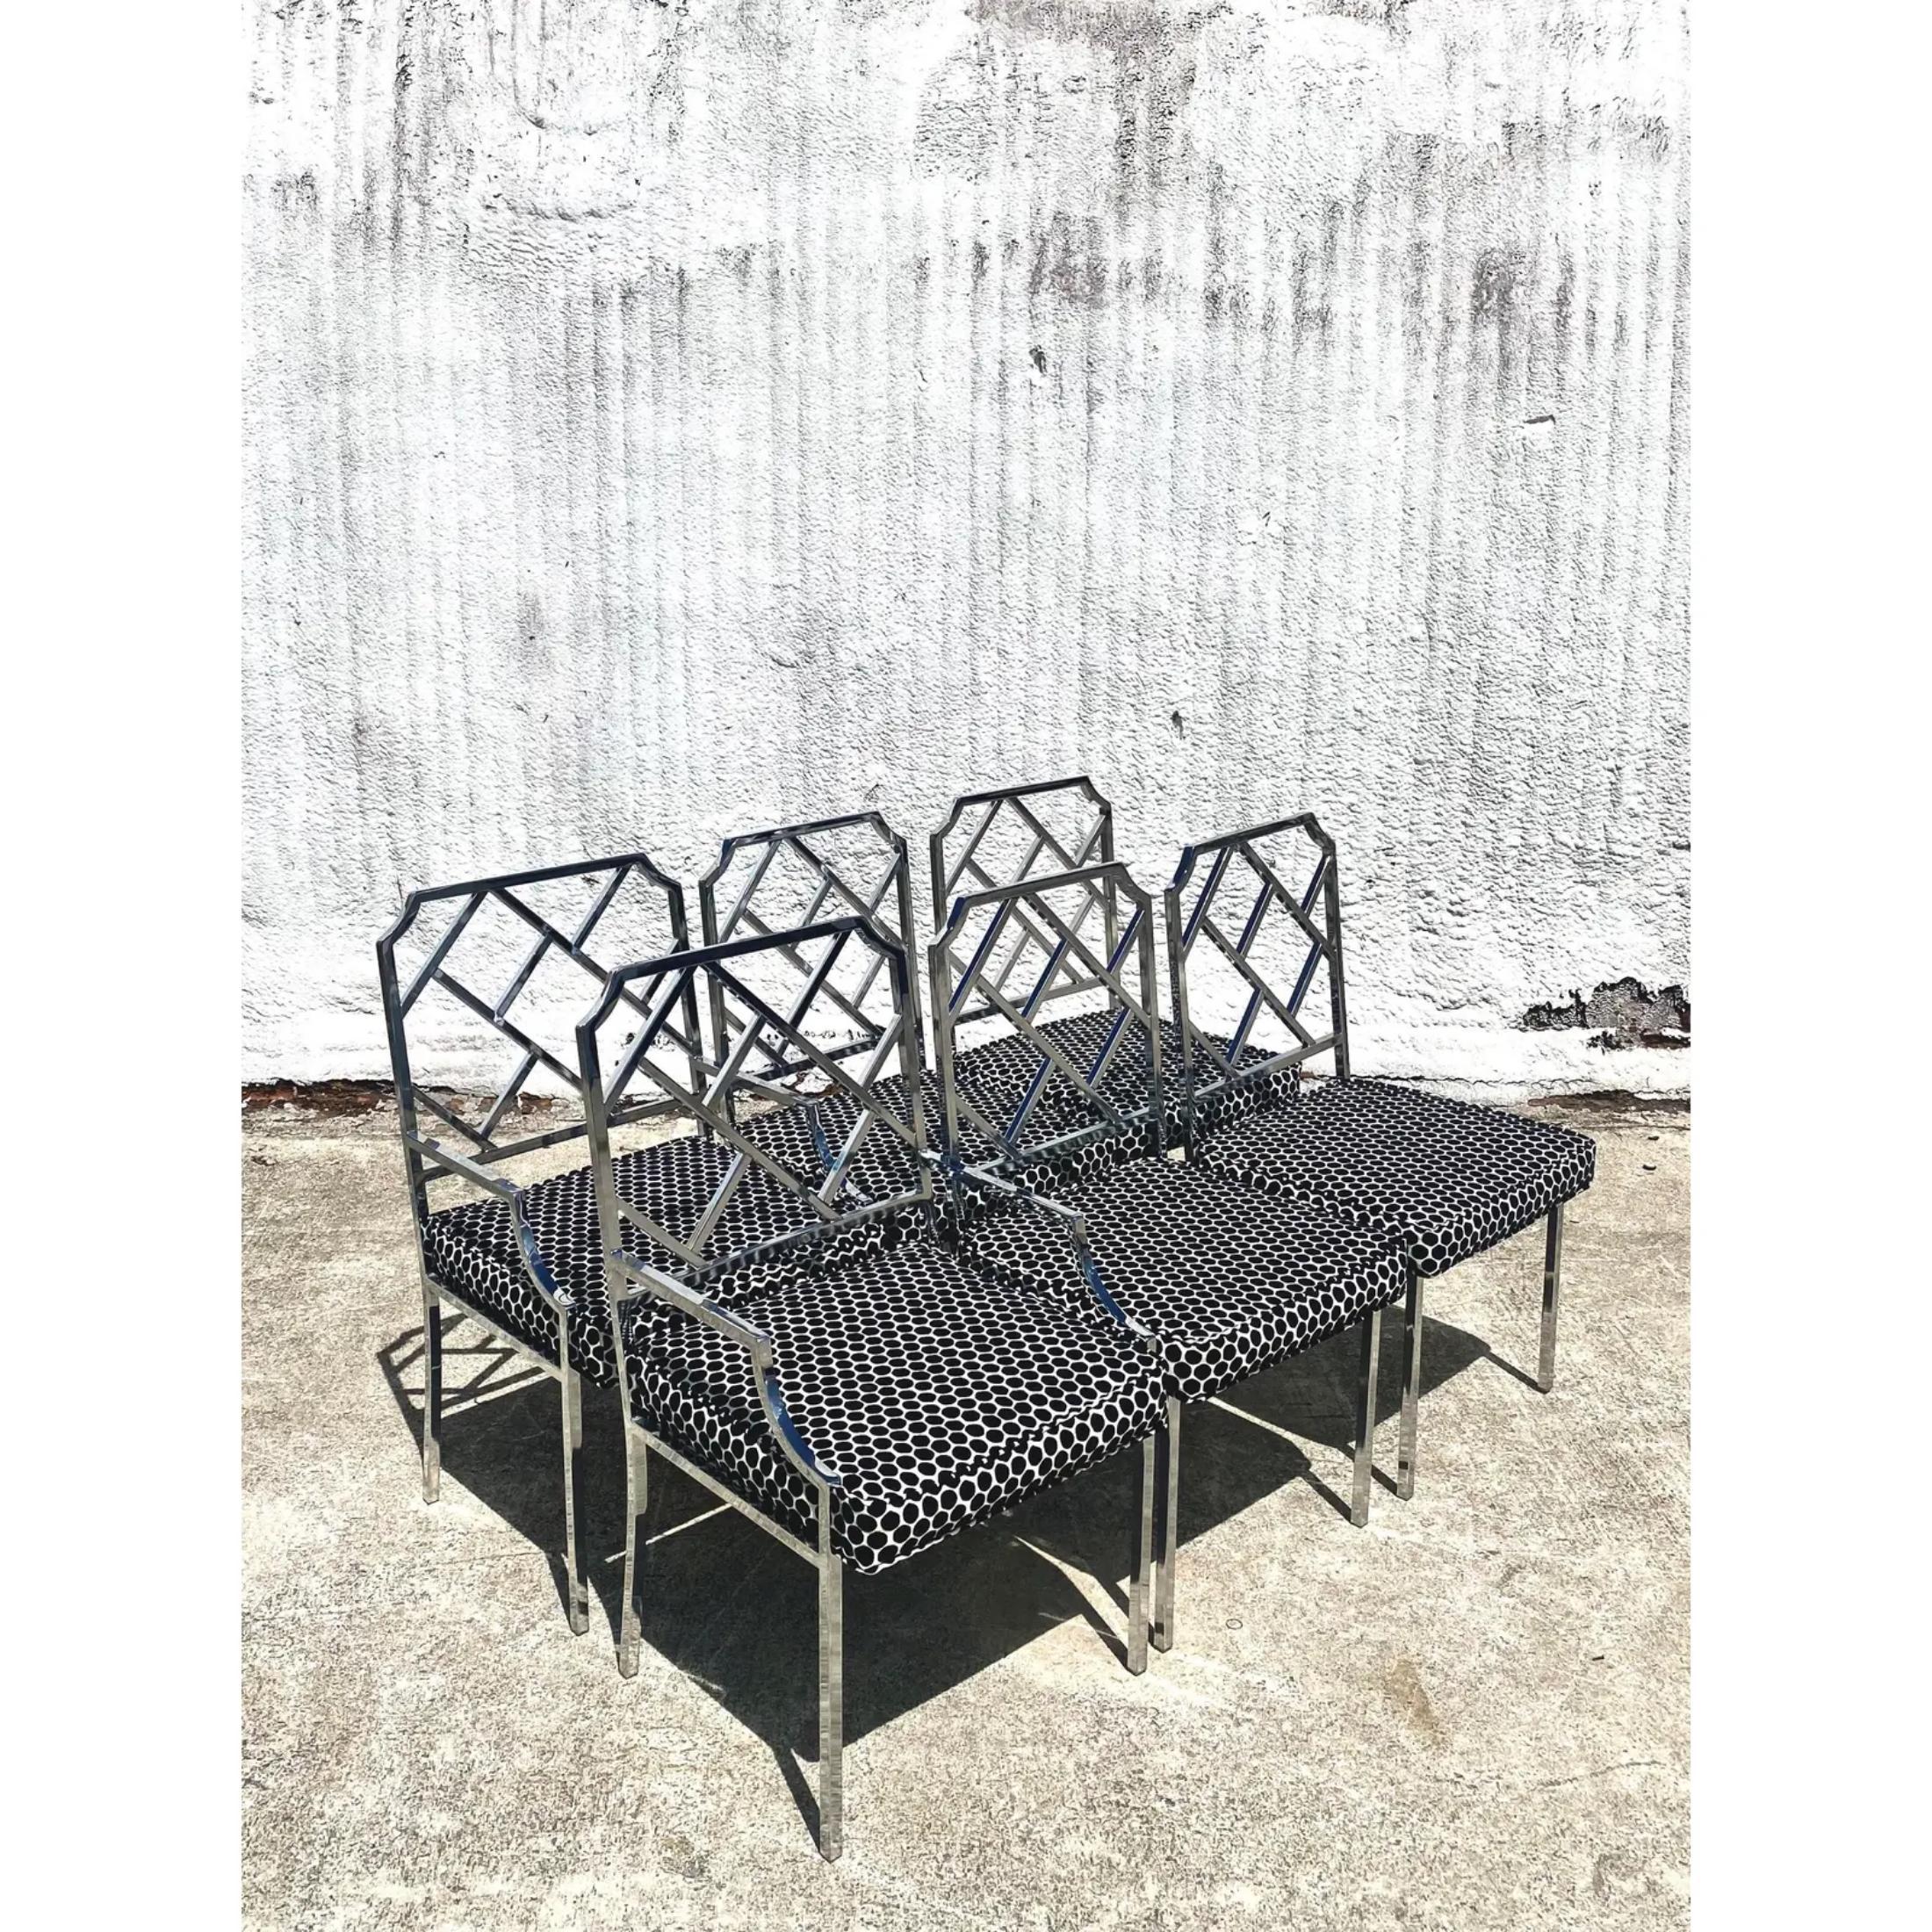 Incredible set of 6 mirror chrome dining chairs. Done in the Chinese Chippendale style with a black and white Devore upholstery. Designed by Milo Baughman for DIA. Unmarked. Acquired from a Palm Beach estate.